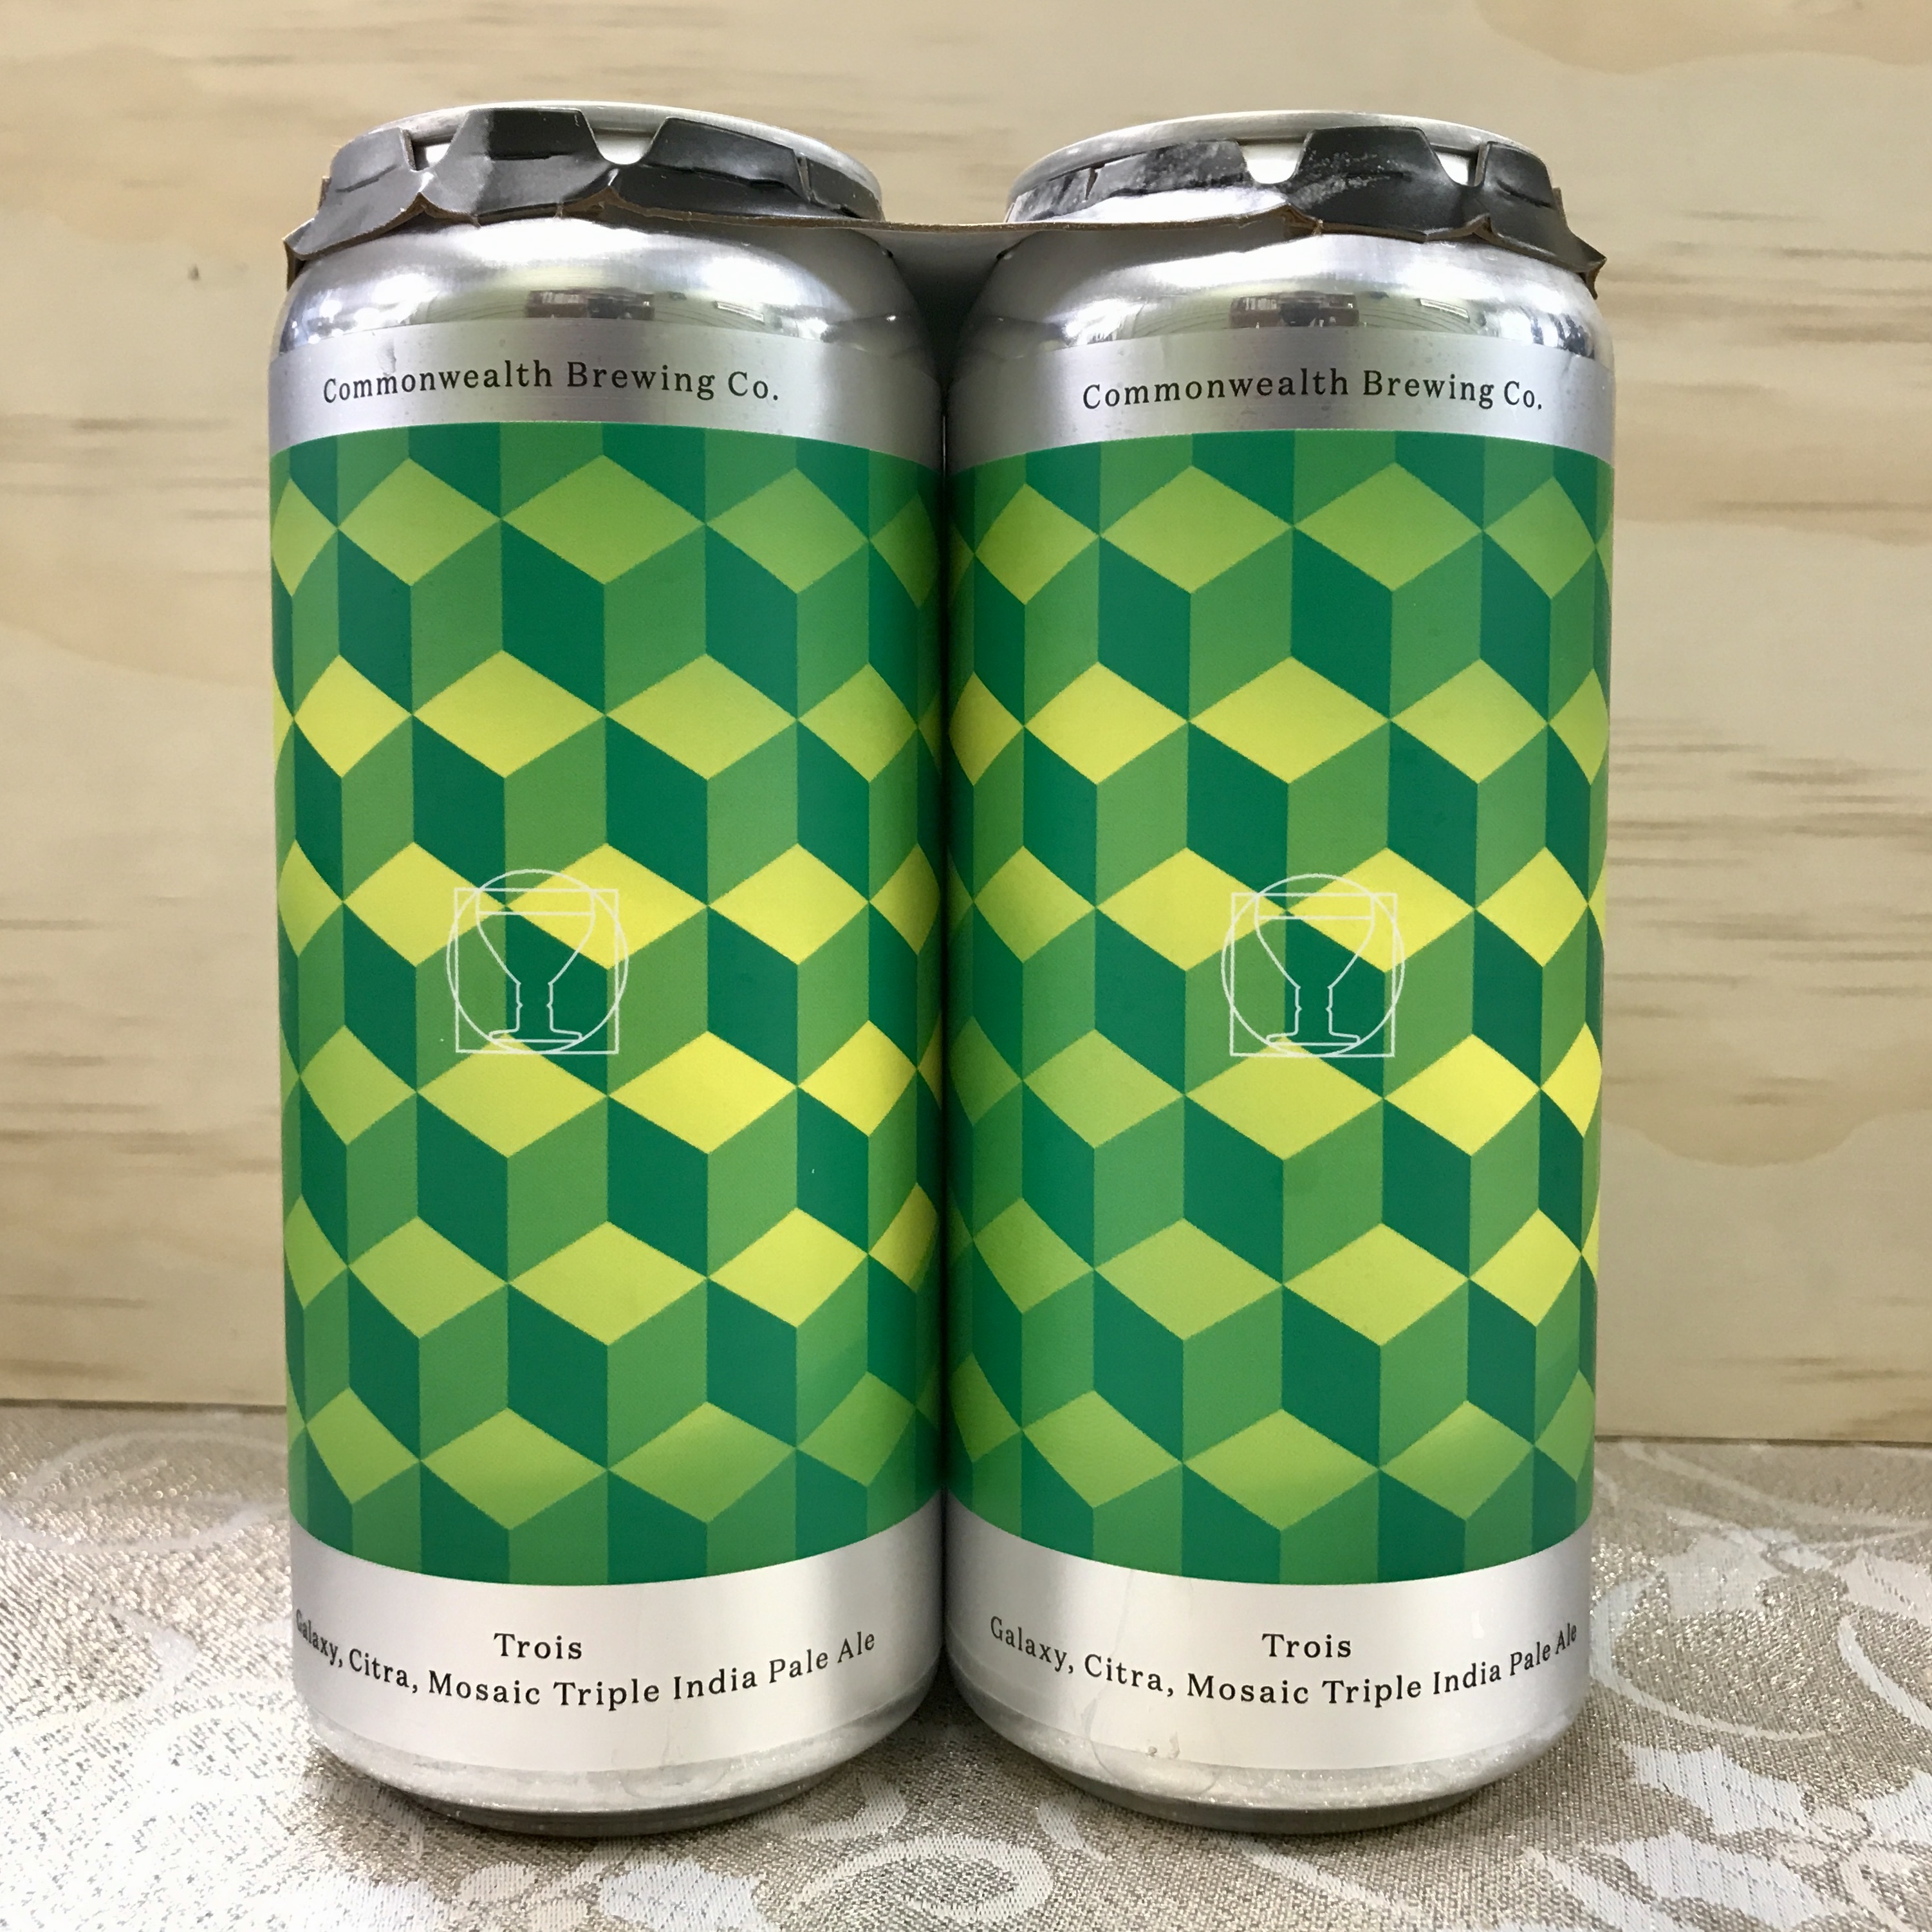 Commonweath Brewing Co. Trois IPA 4 x 1 pint cans